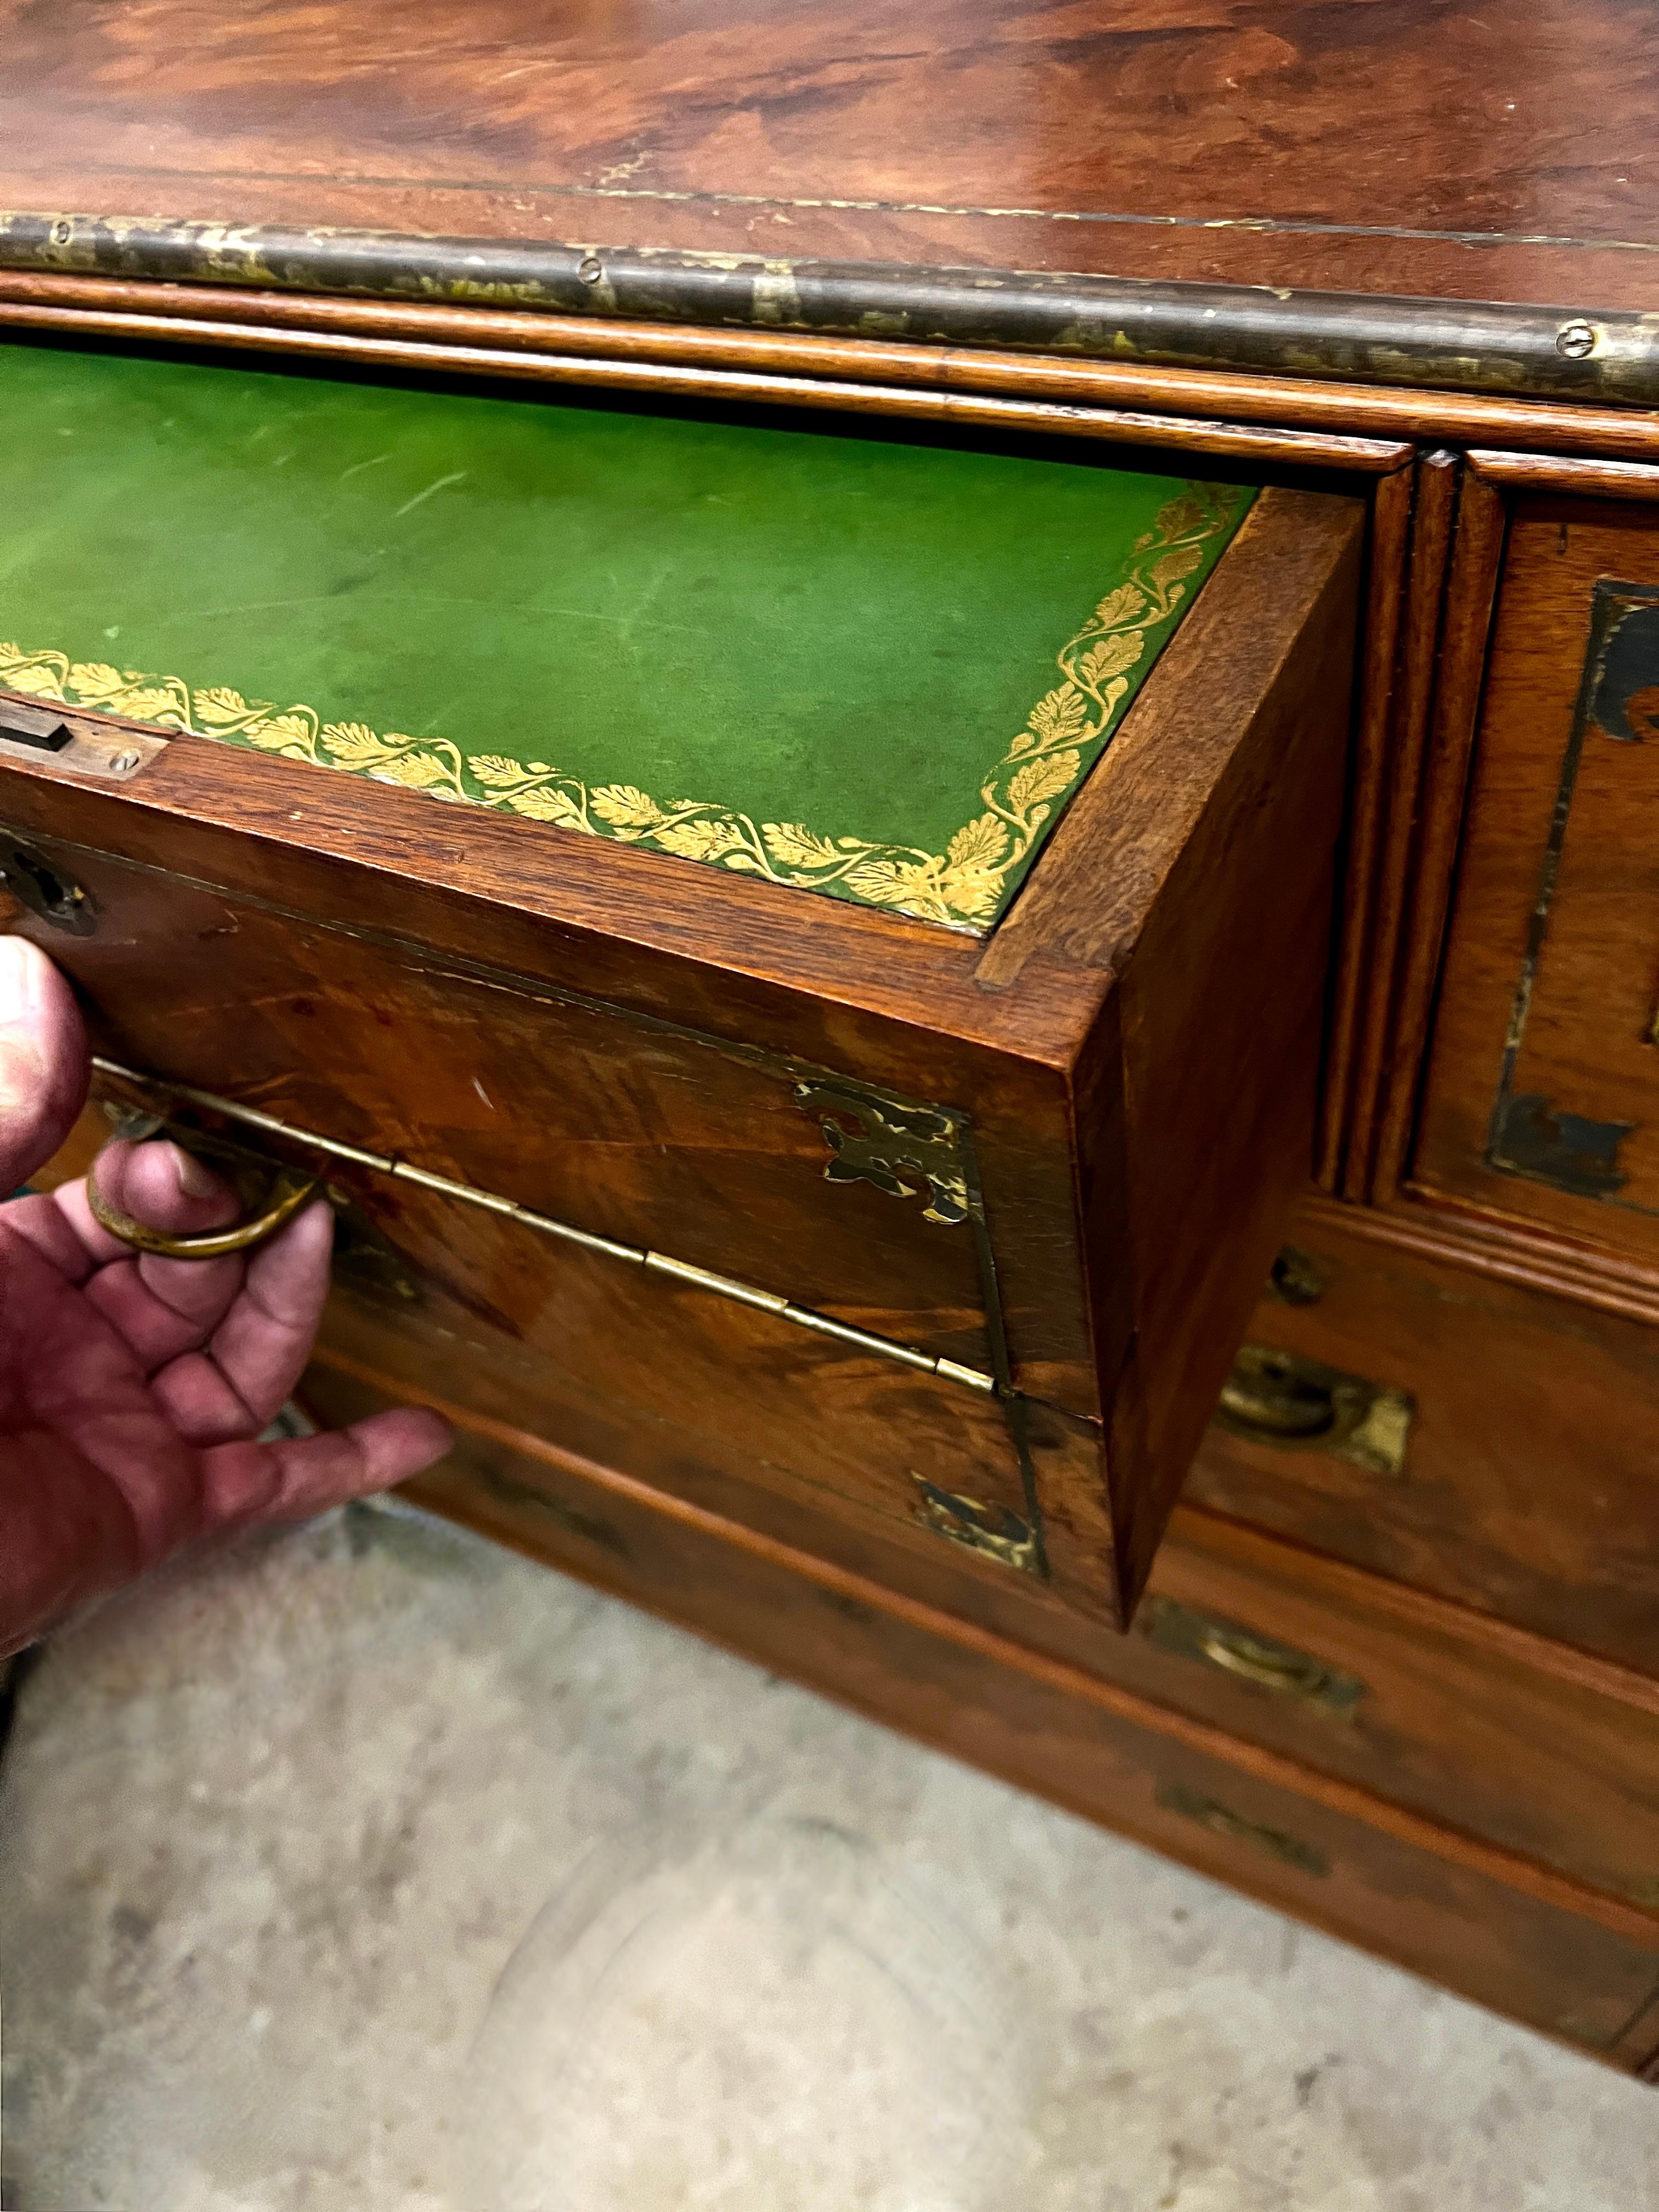 Anglo Raj Regency Campaign Chest with Desk Trimmed in Brass Banding Accents 1811 For Sale 12